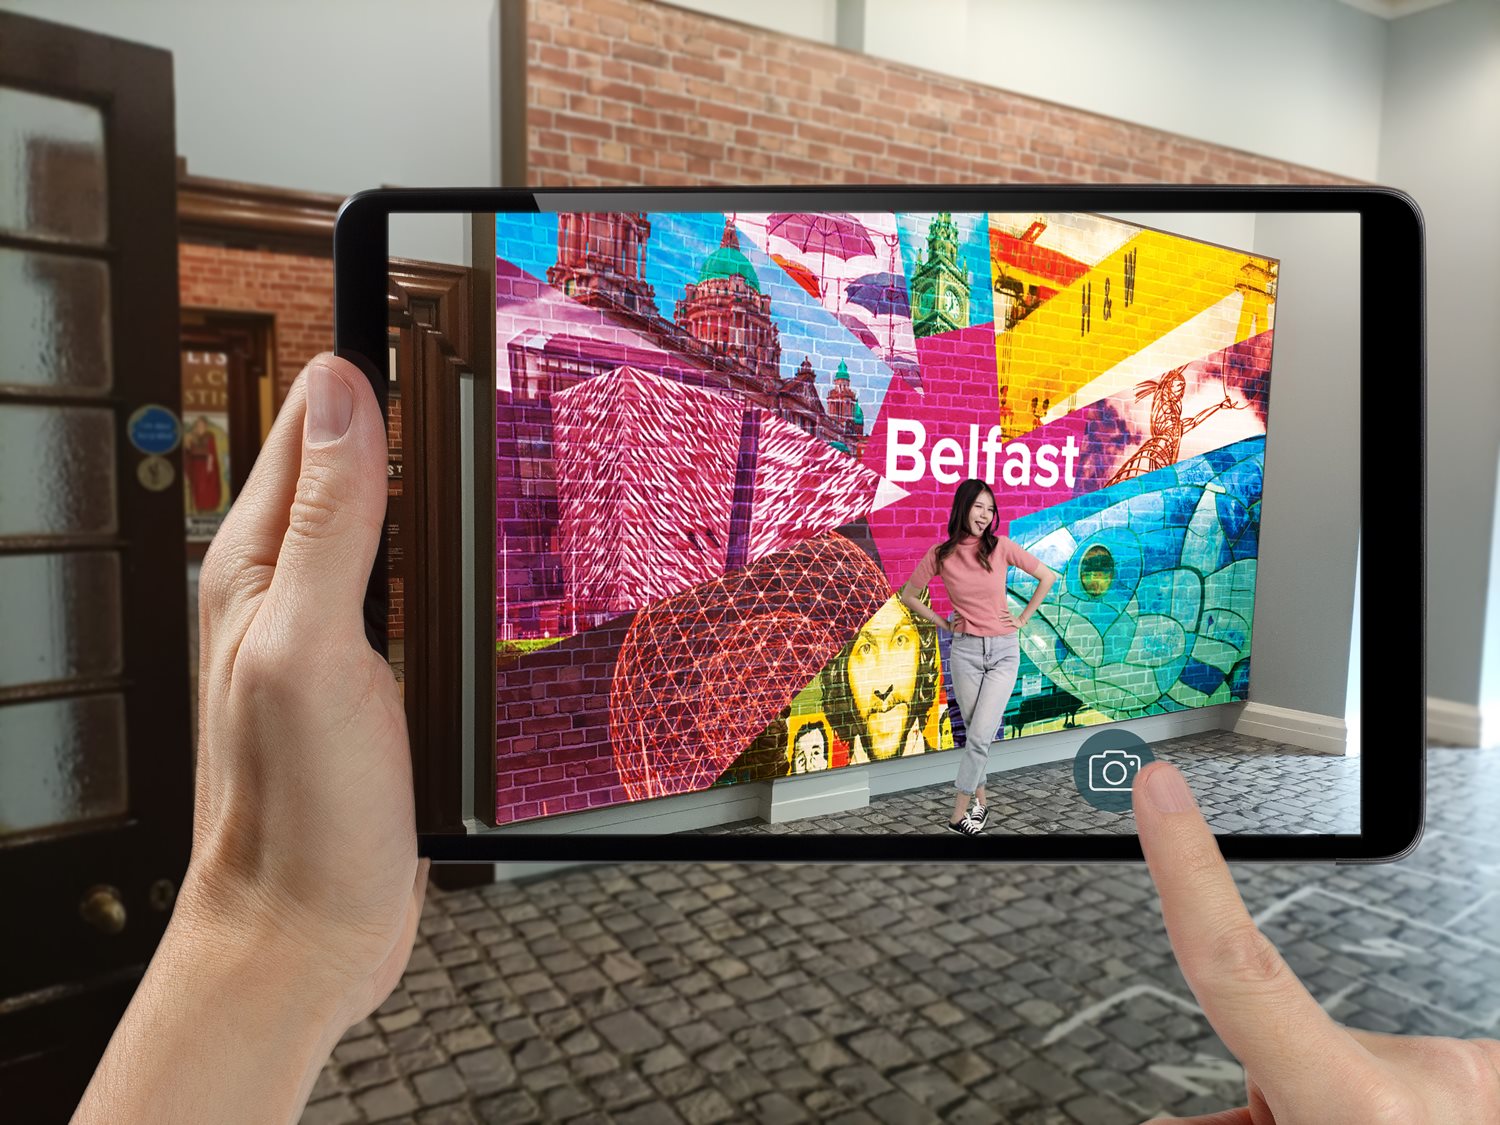 A photograph of someone holding an iPad, through which they are viewing an augmented reality experience around them